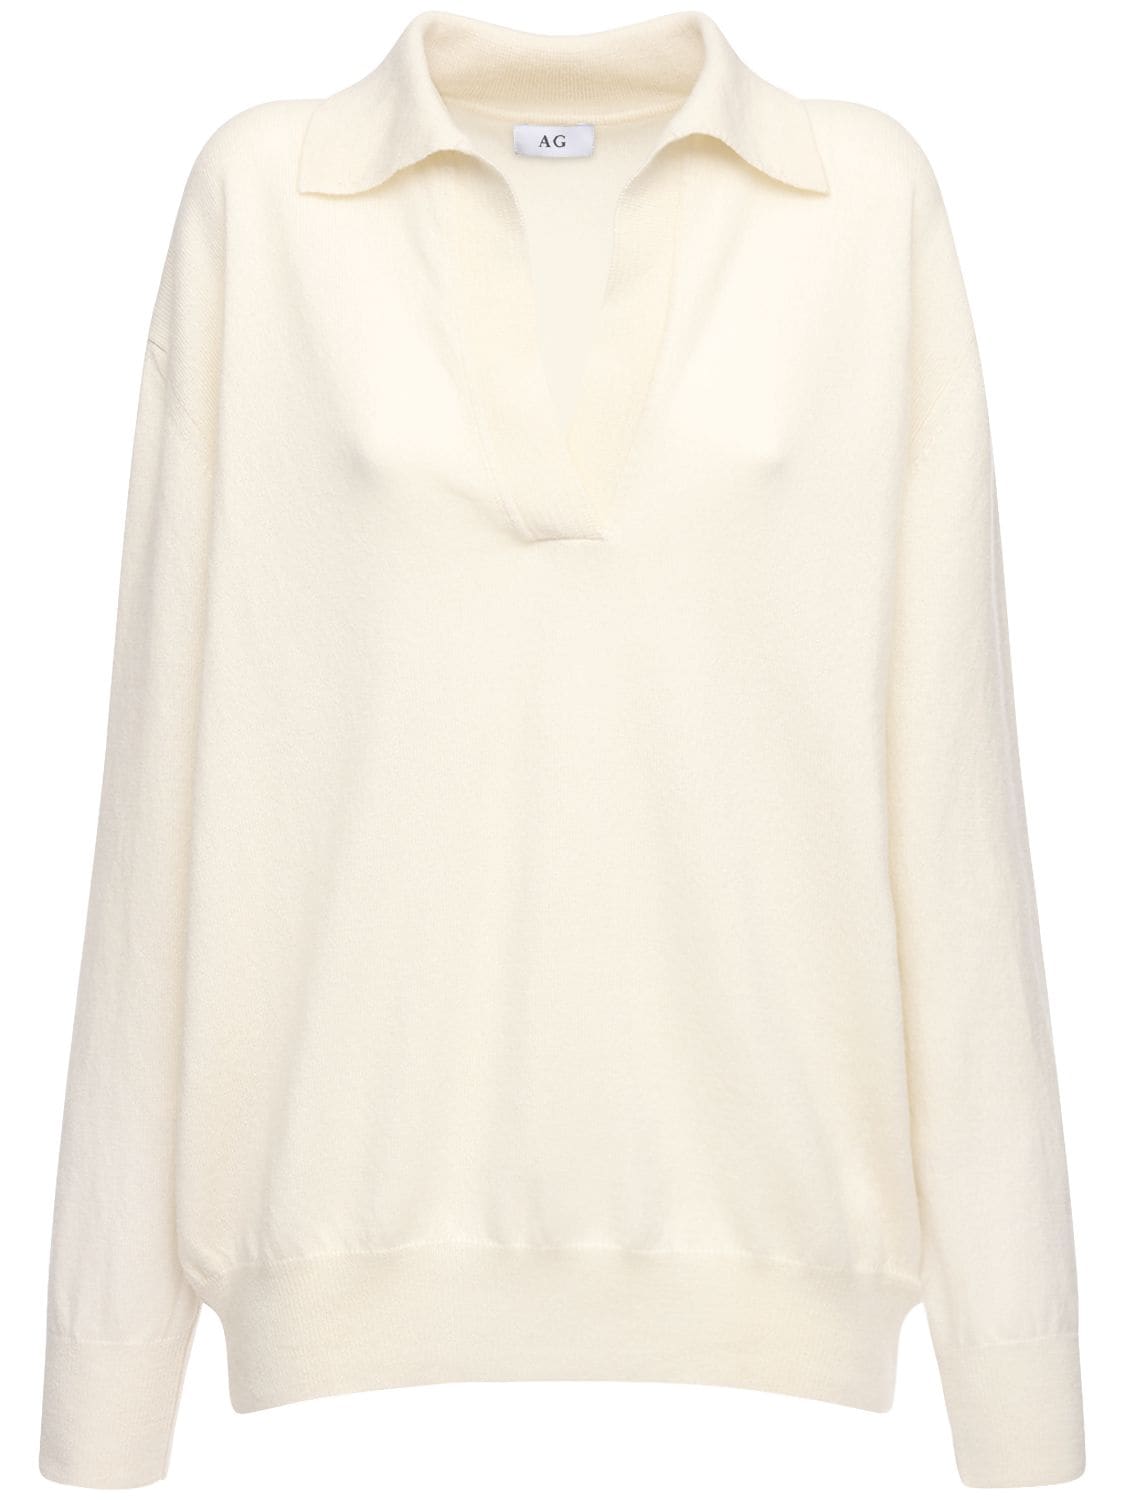 Ag V Neck Cashmere Knit Sweater In Ivory